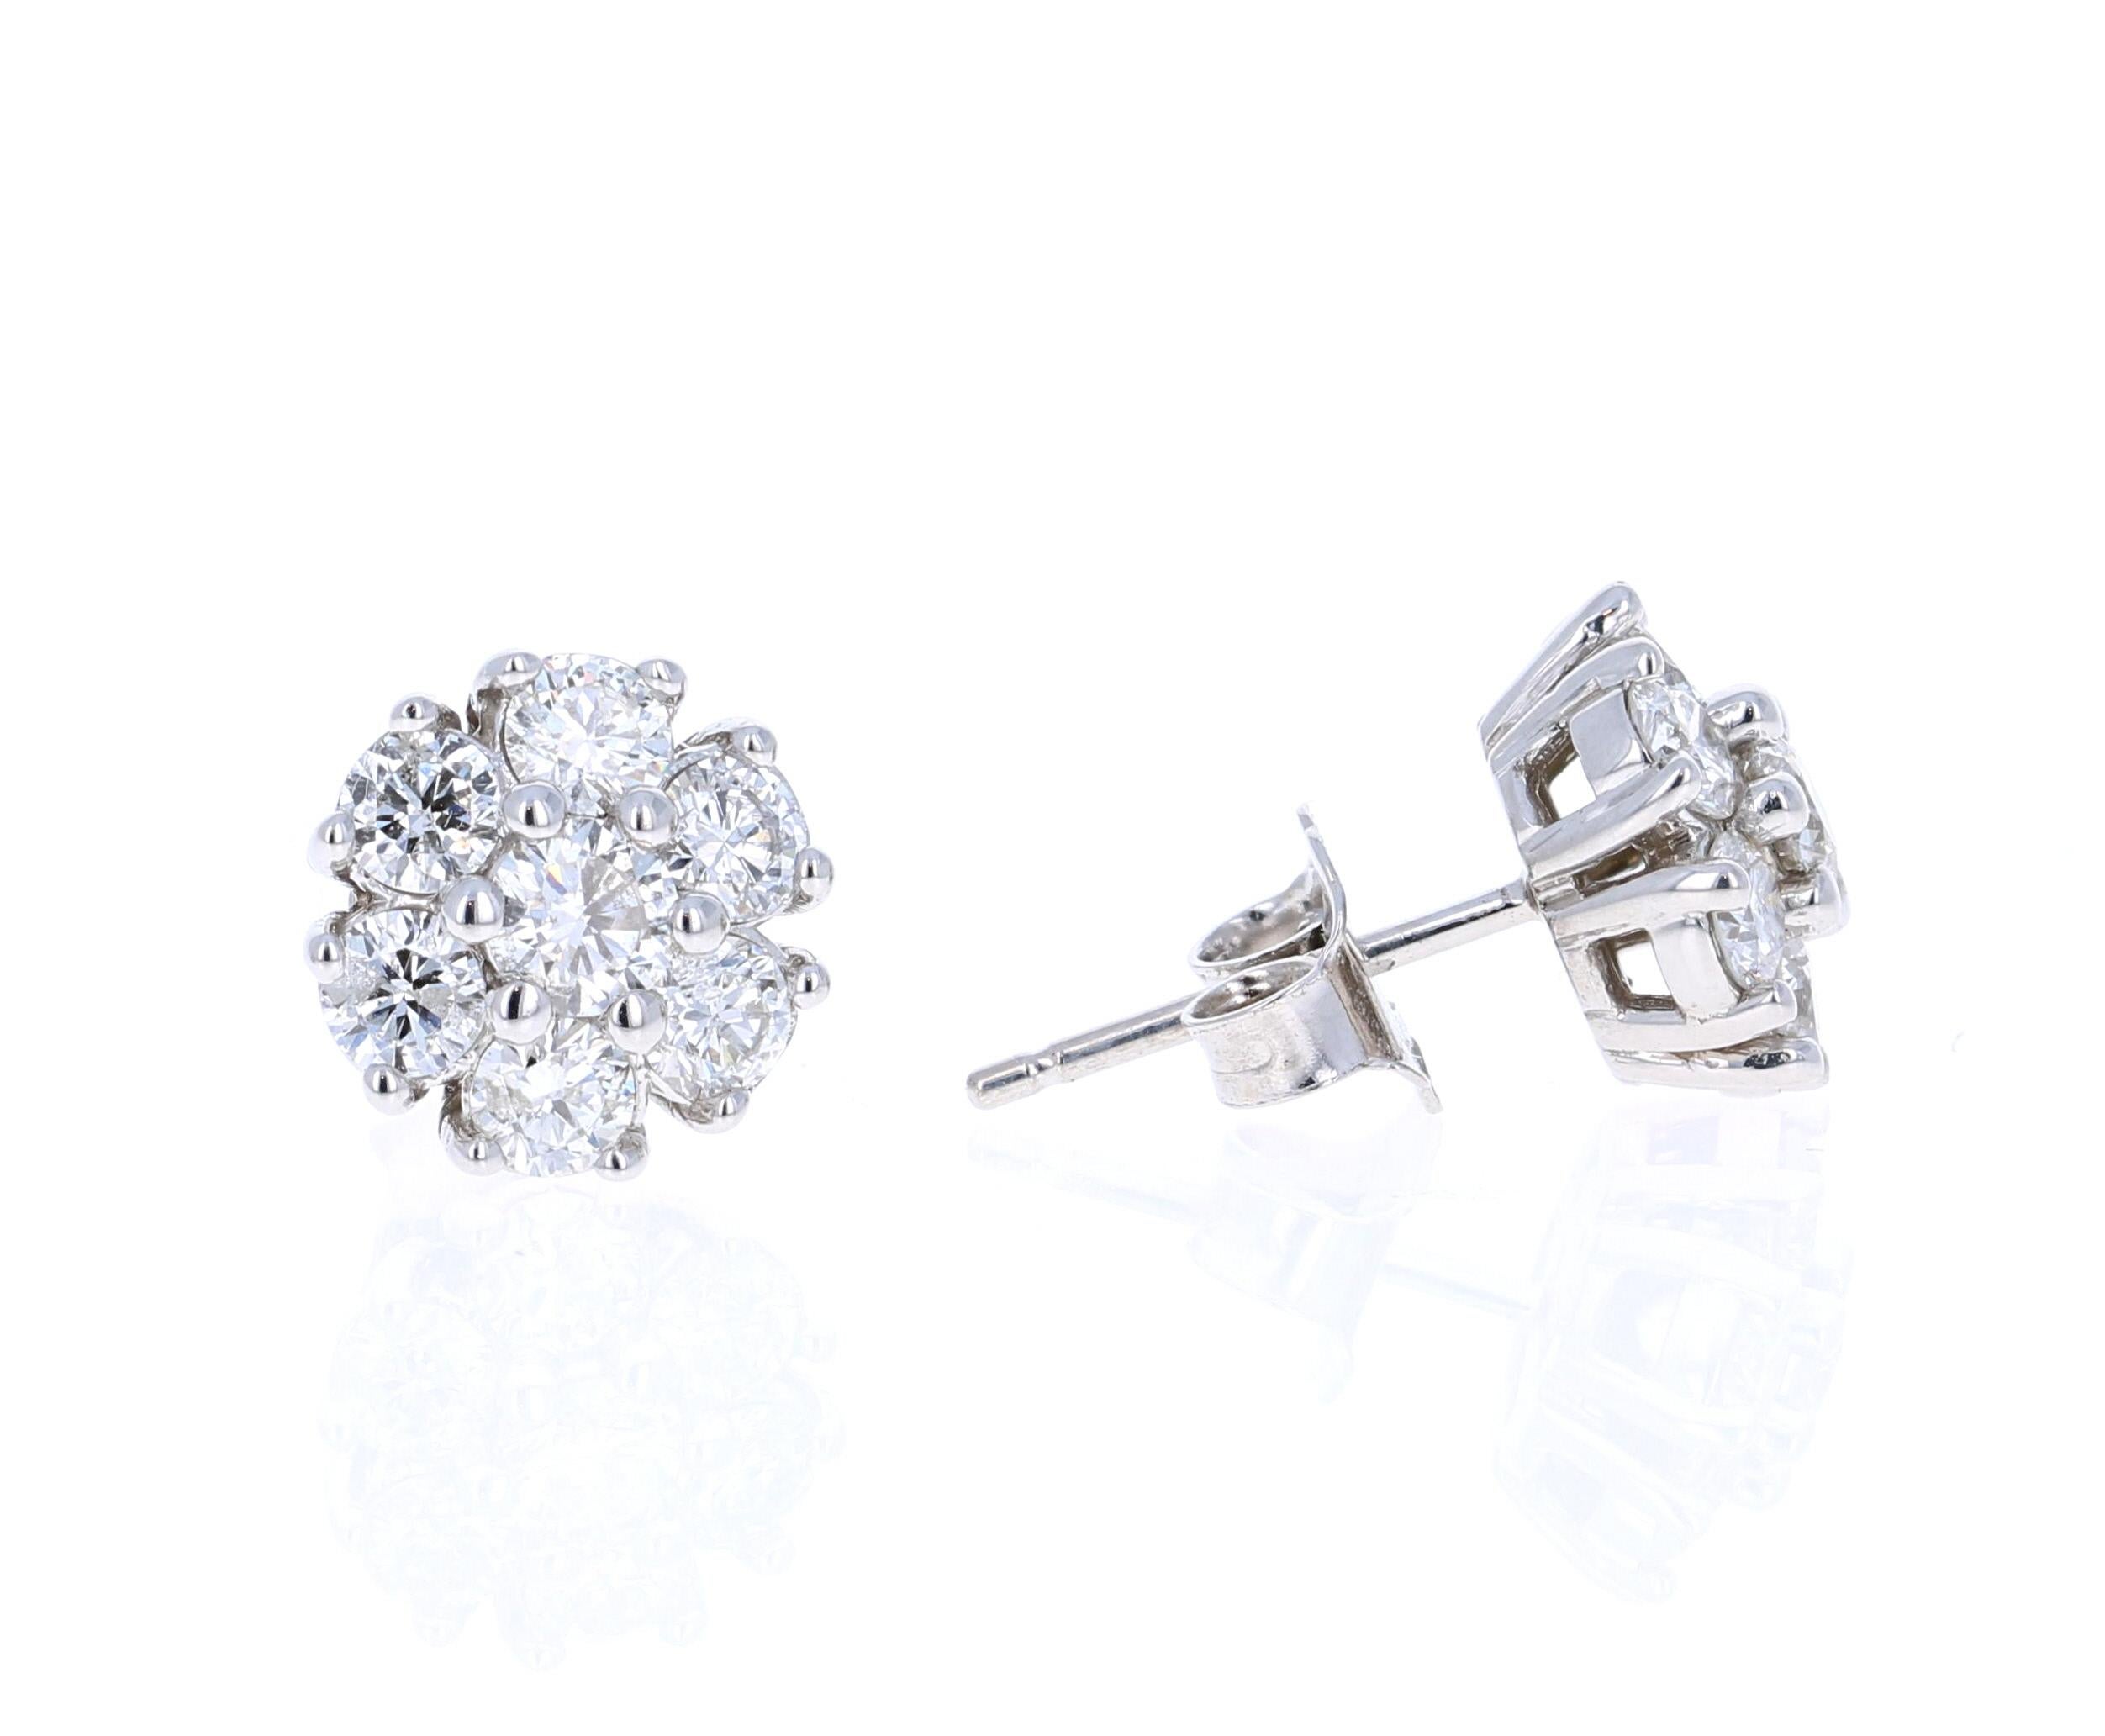 This classic design of diamond earrings has 14 Round Cut Diamonds that weigh 1.23 Carats. Clarity: SI, Color: F

The backing of the earring is a standard push back. The Earrings are made in 14K White Gold and weigh approximately 2.2 grams.

